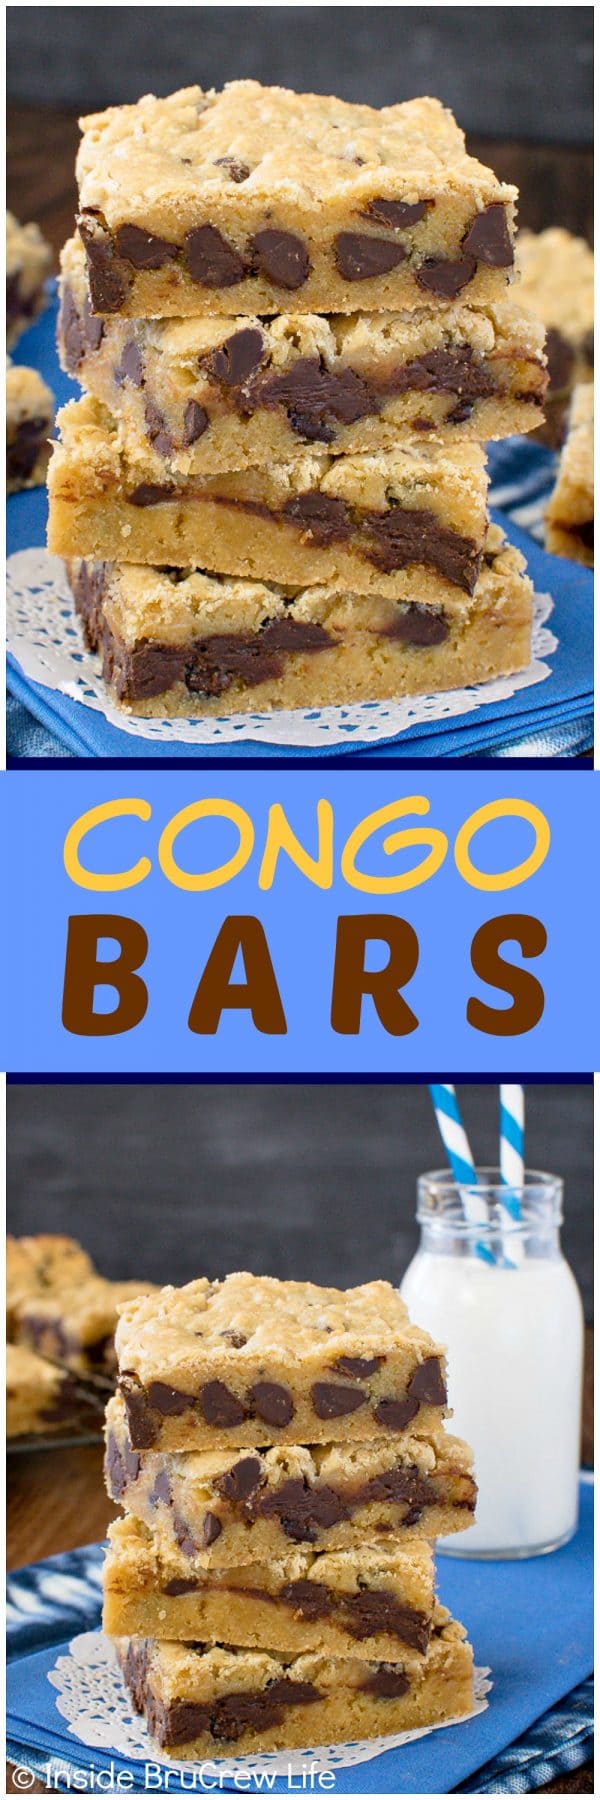 Two pictures of congo bars collaged together with a blue text box.